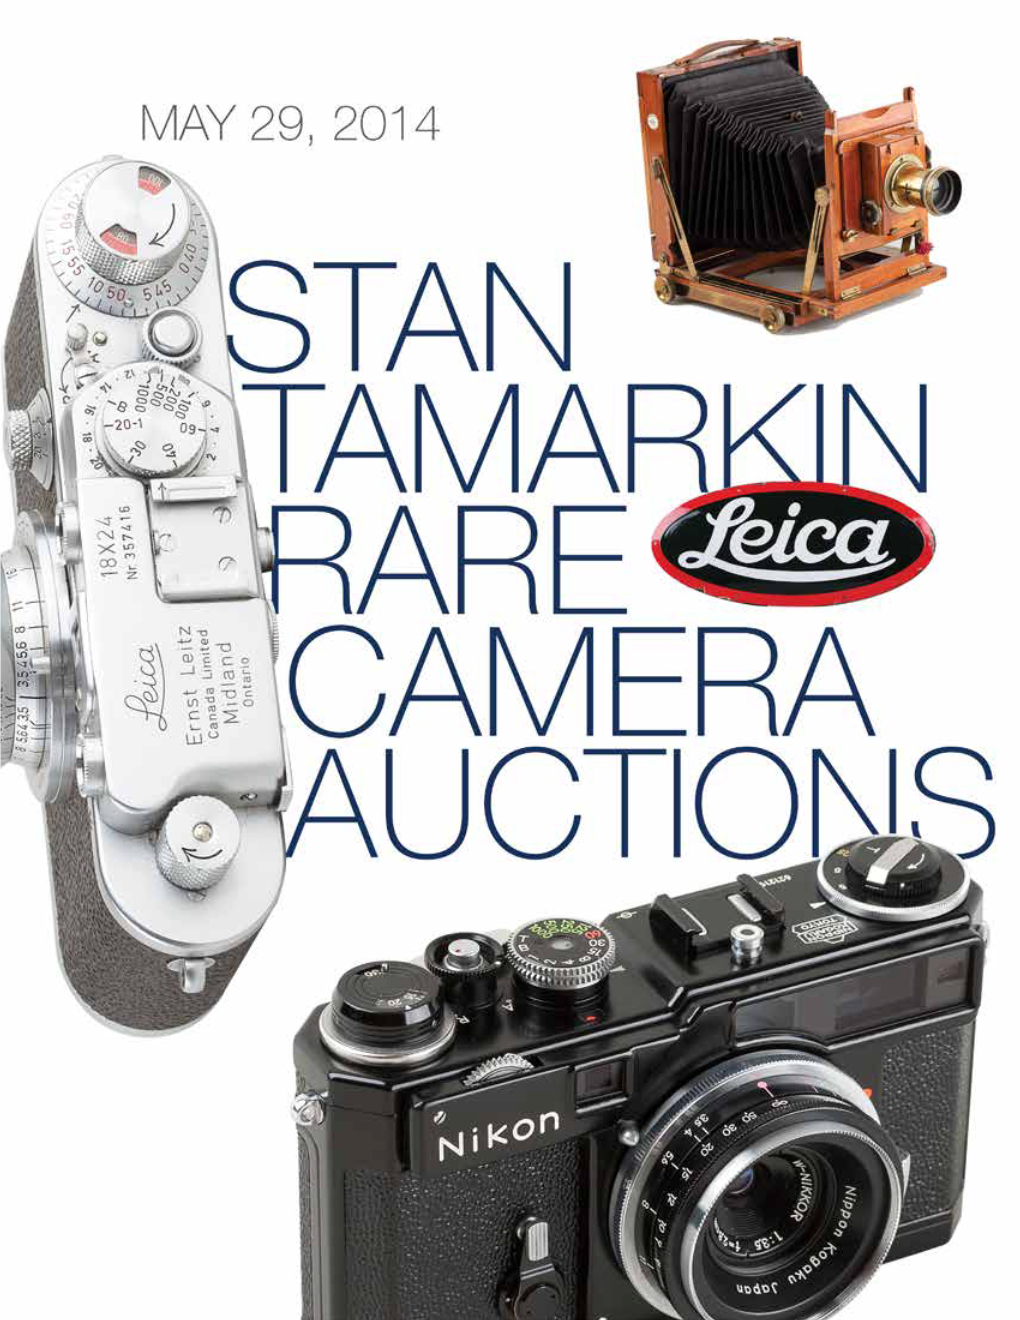 STAN TAMARKIN RARE CAMERA AUCTIONS VIEWING Wednesday, May 28, 2014 9:30 AM – 2:30 PM EST